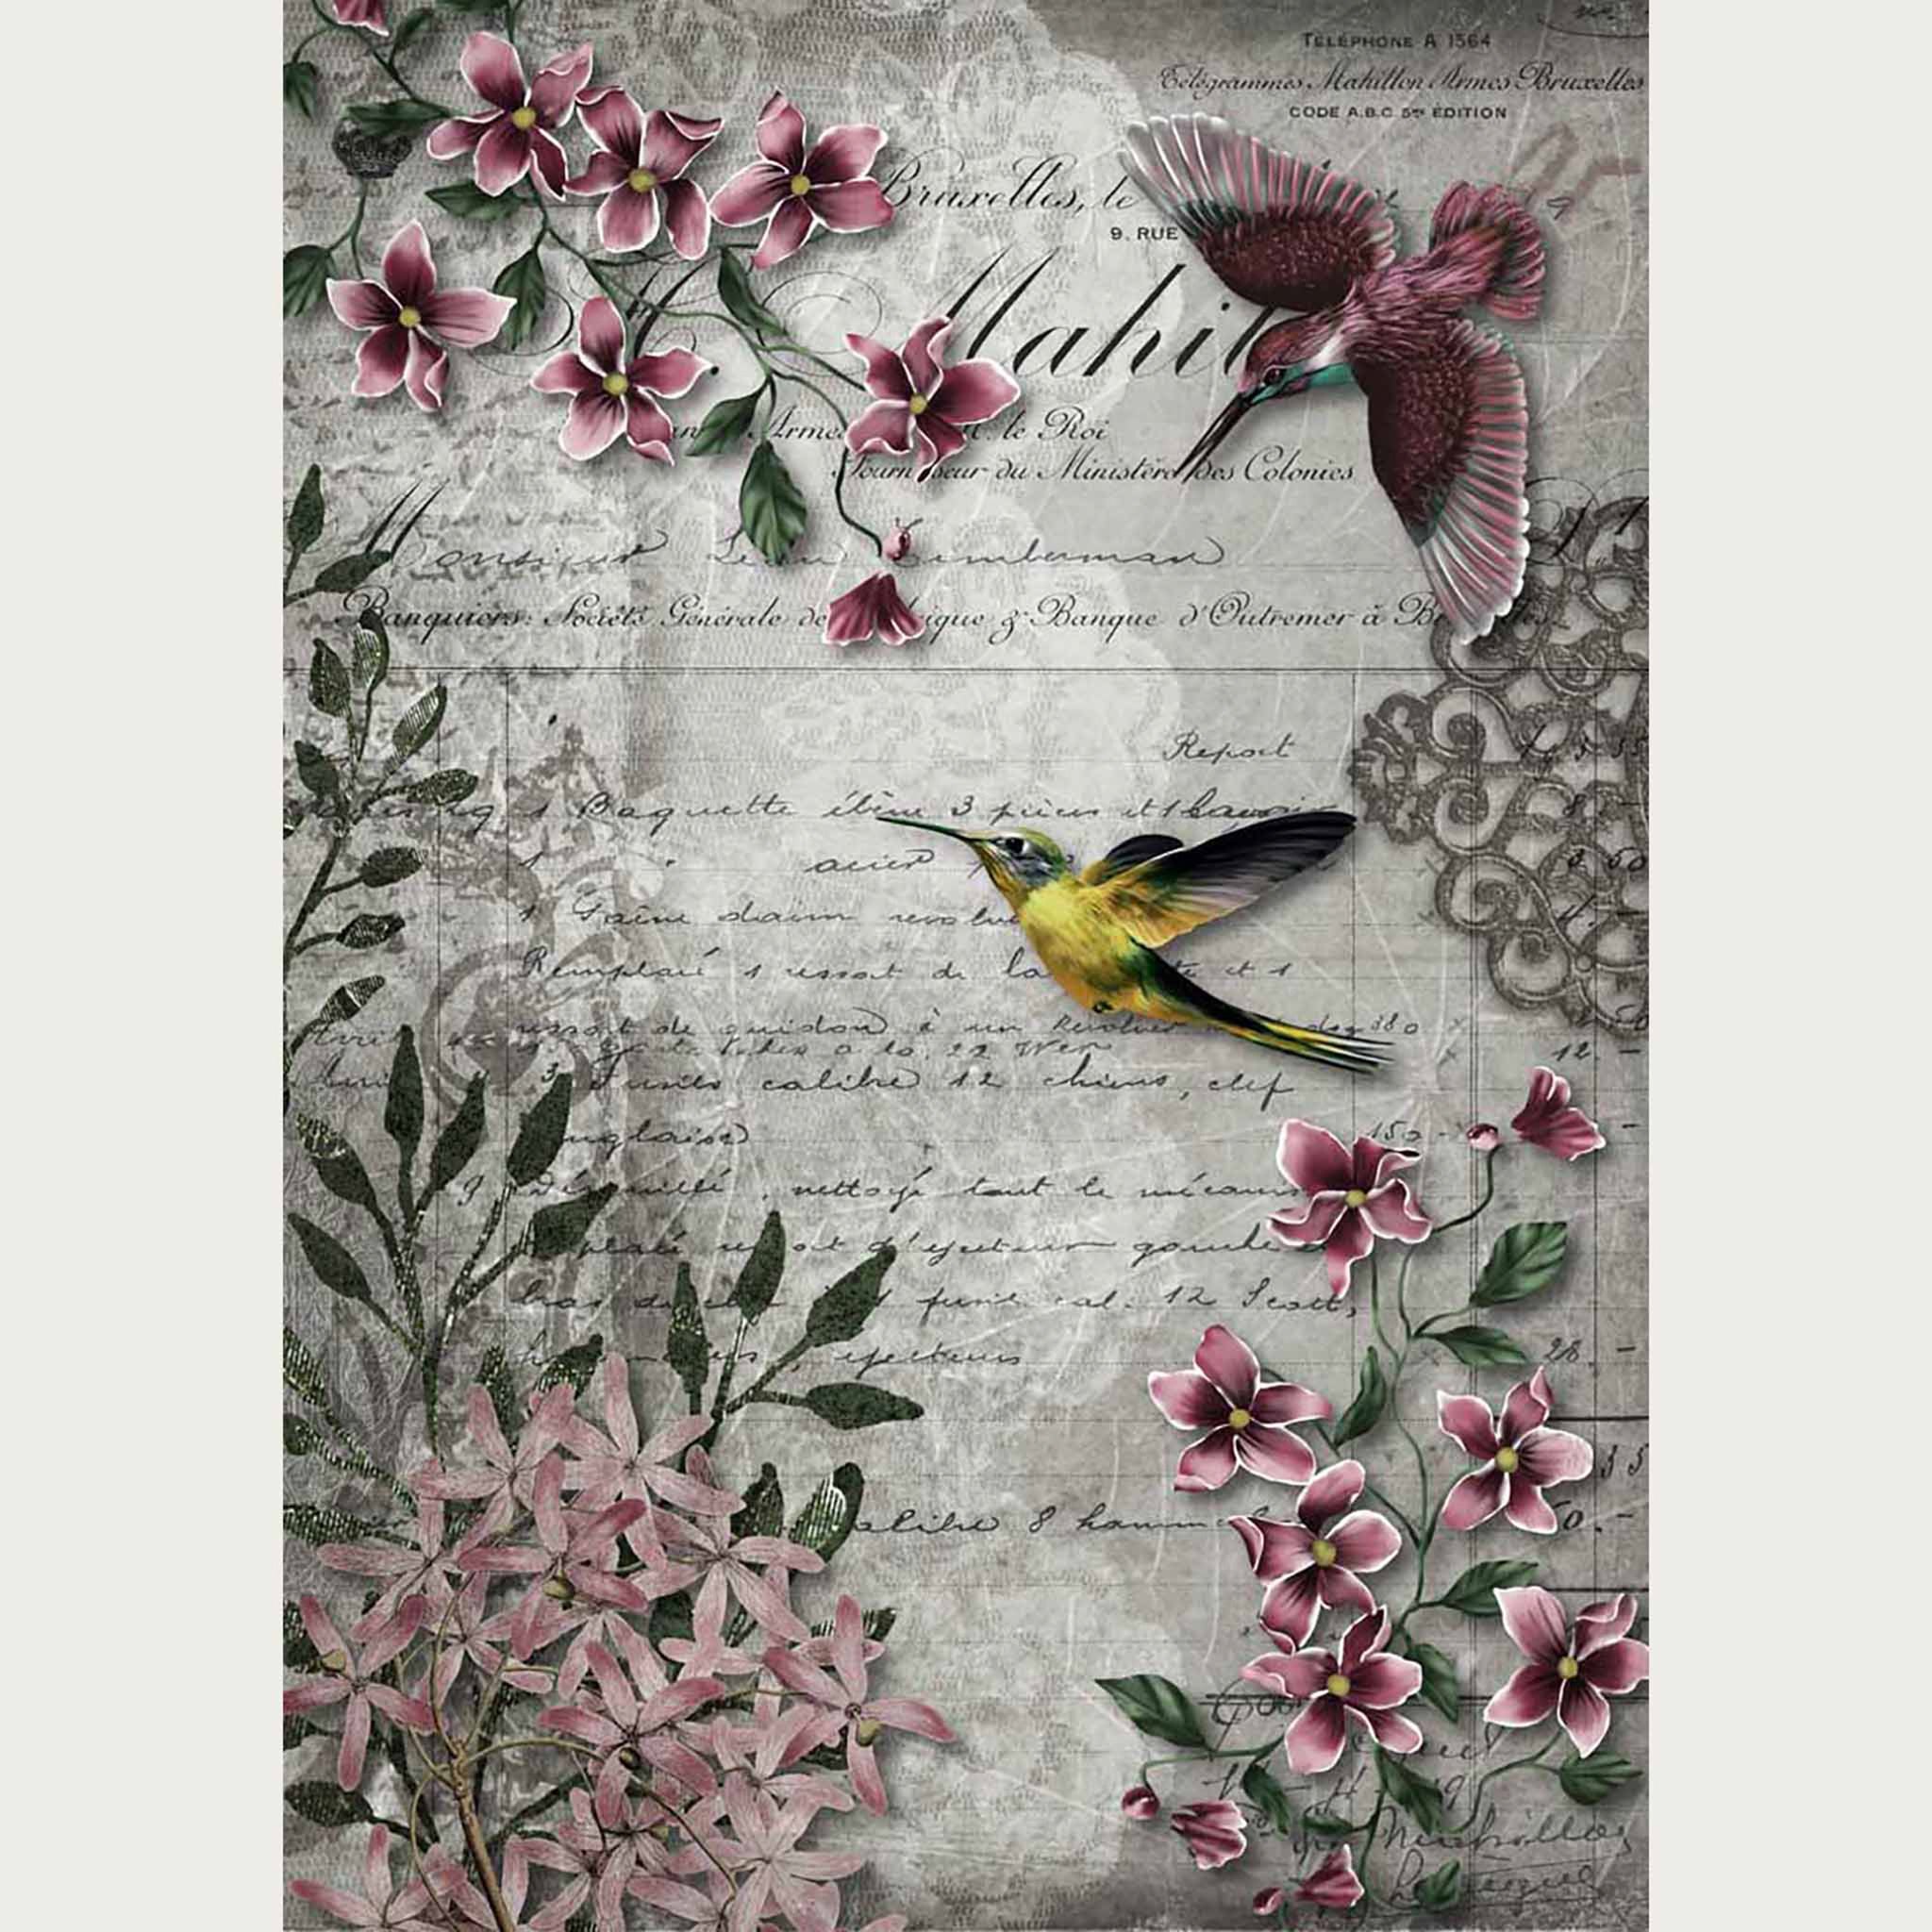 A2 rice paper design featuring a beautiful combination of hummingbirds, flowers, and scrollwork against a light gray script letter. White borders are on the sides.